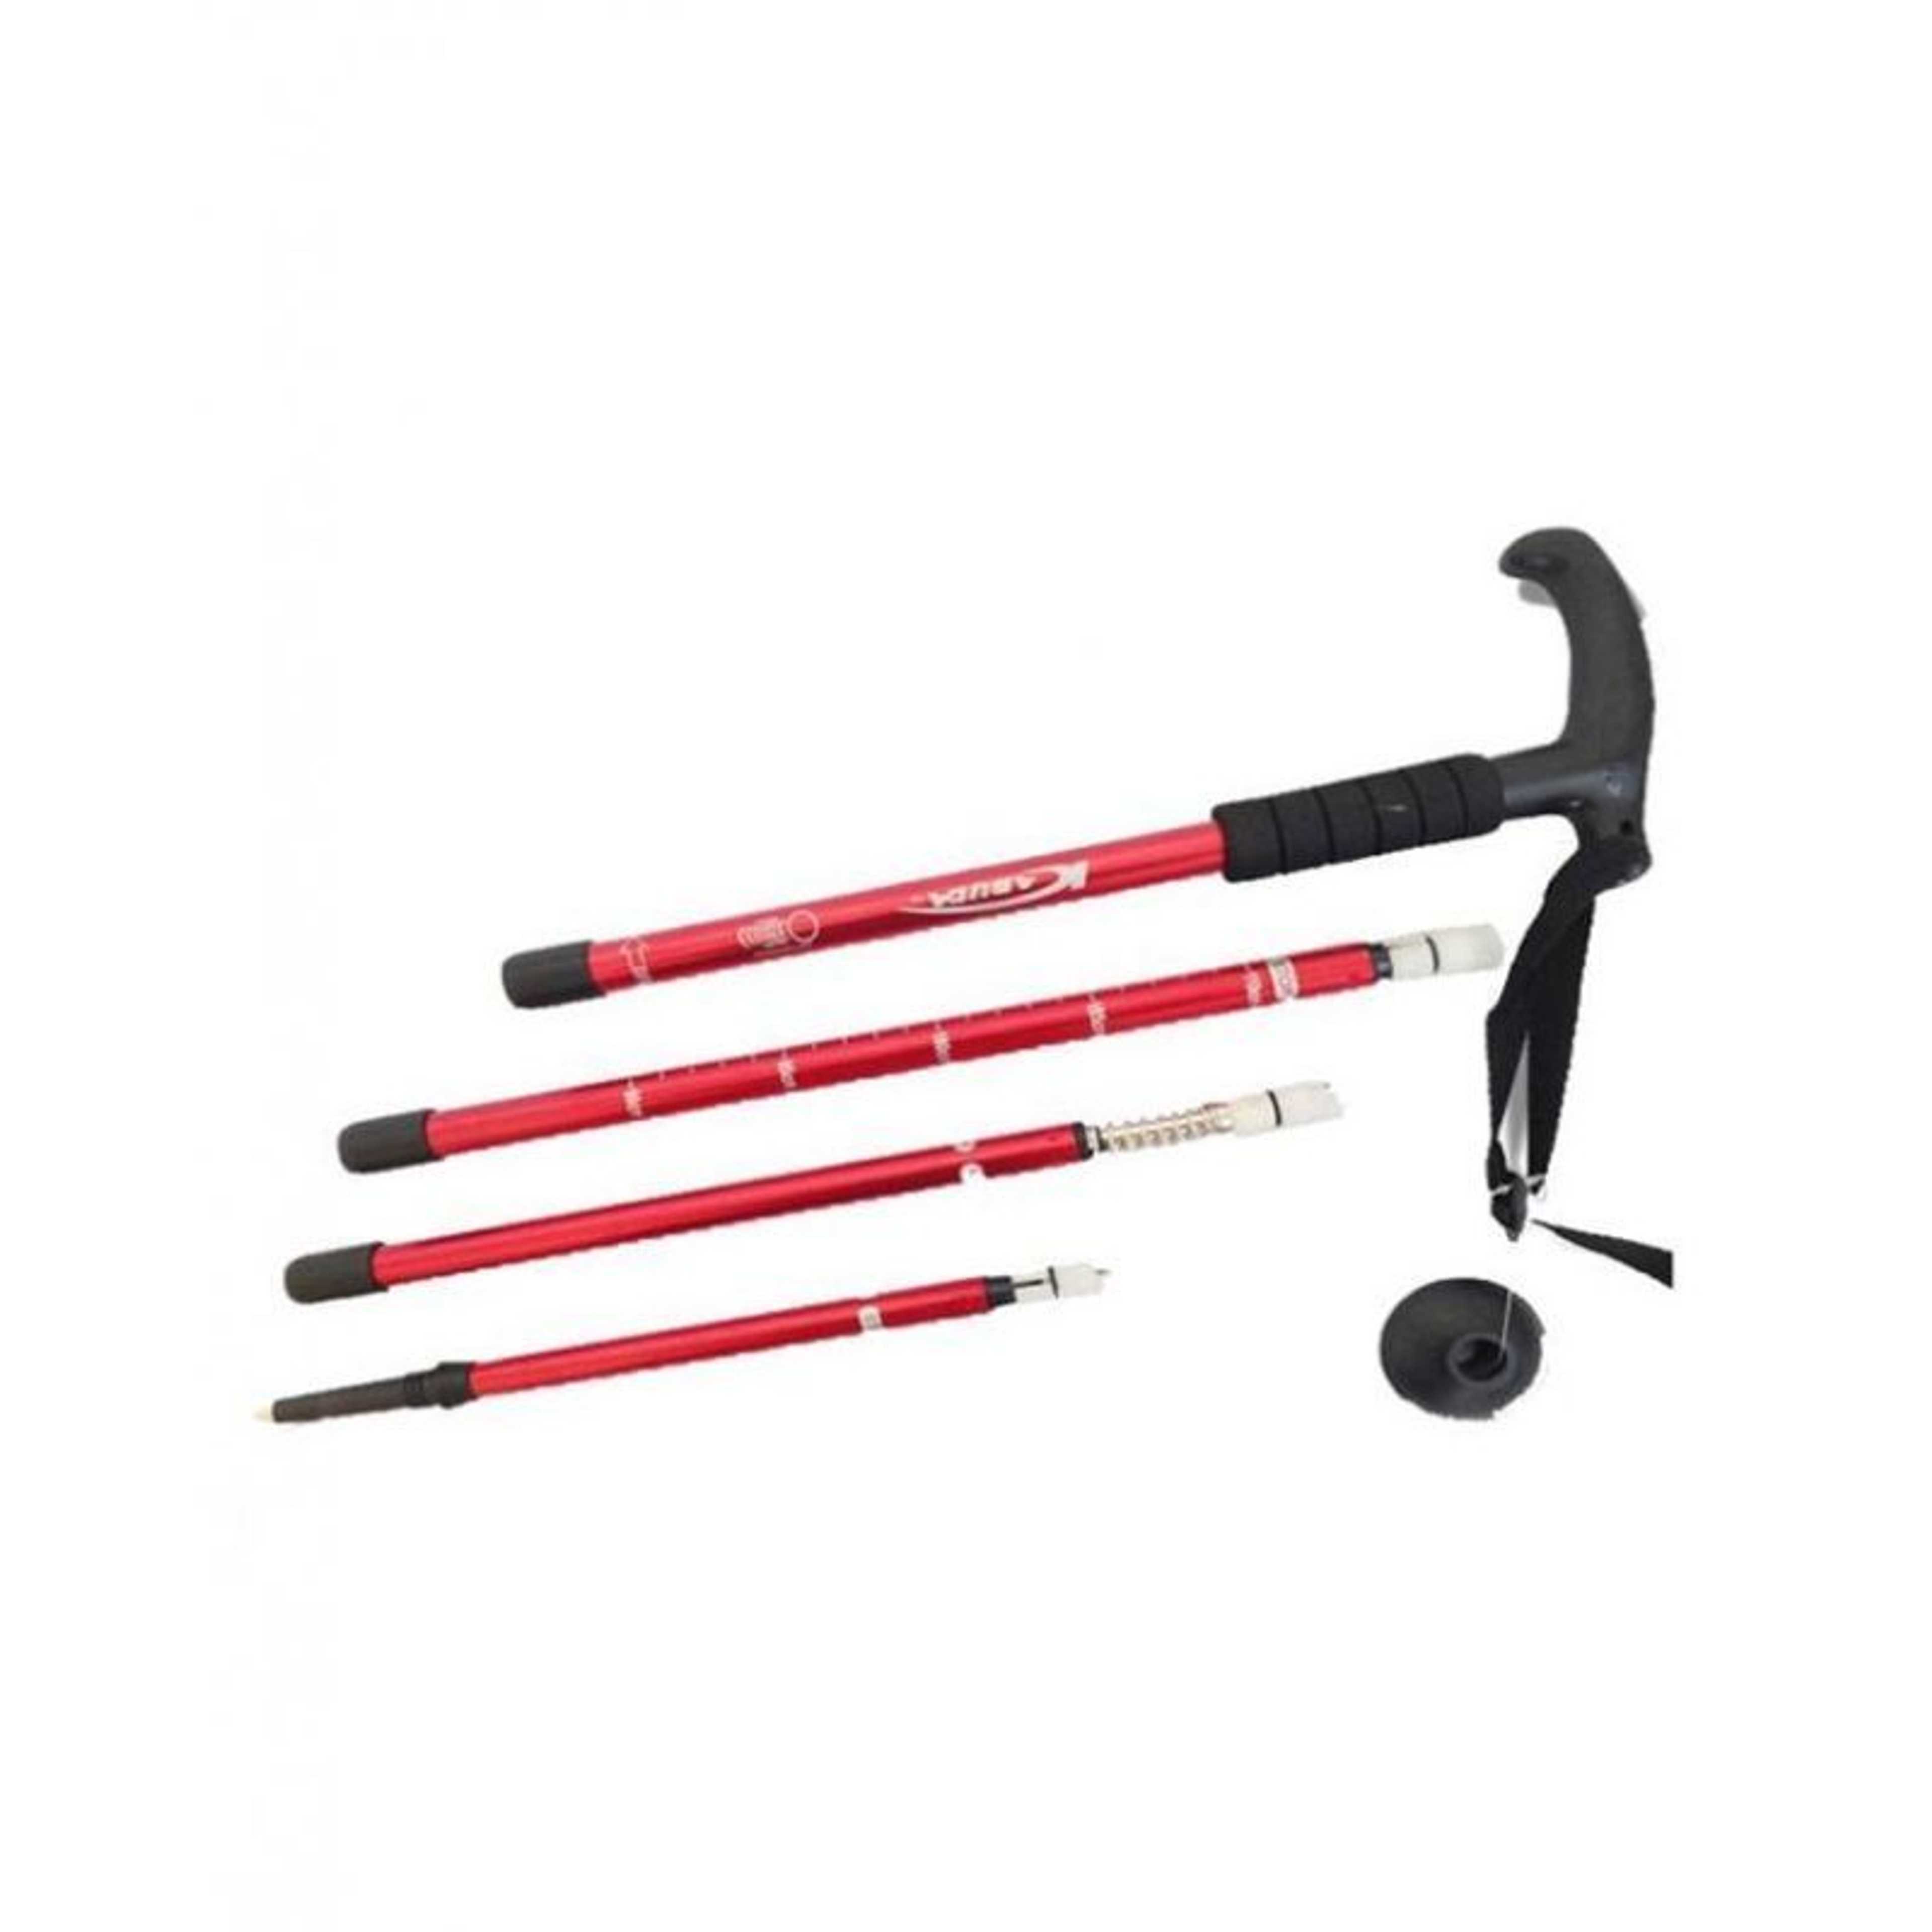 4-Section Adjustable Cane Walking Stick Trekking Poles Trail Ultralight Adjustable Canes For Men Outdoor Camping Hiking Climbing Red